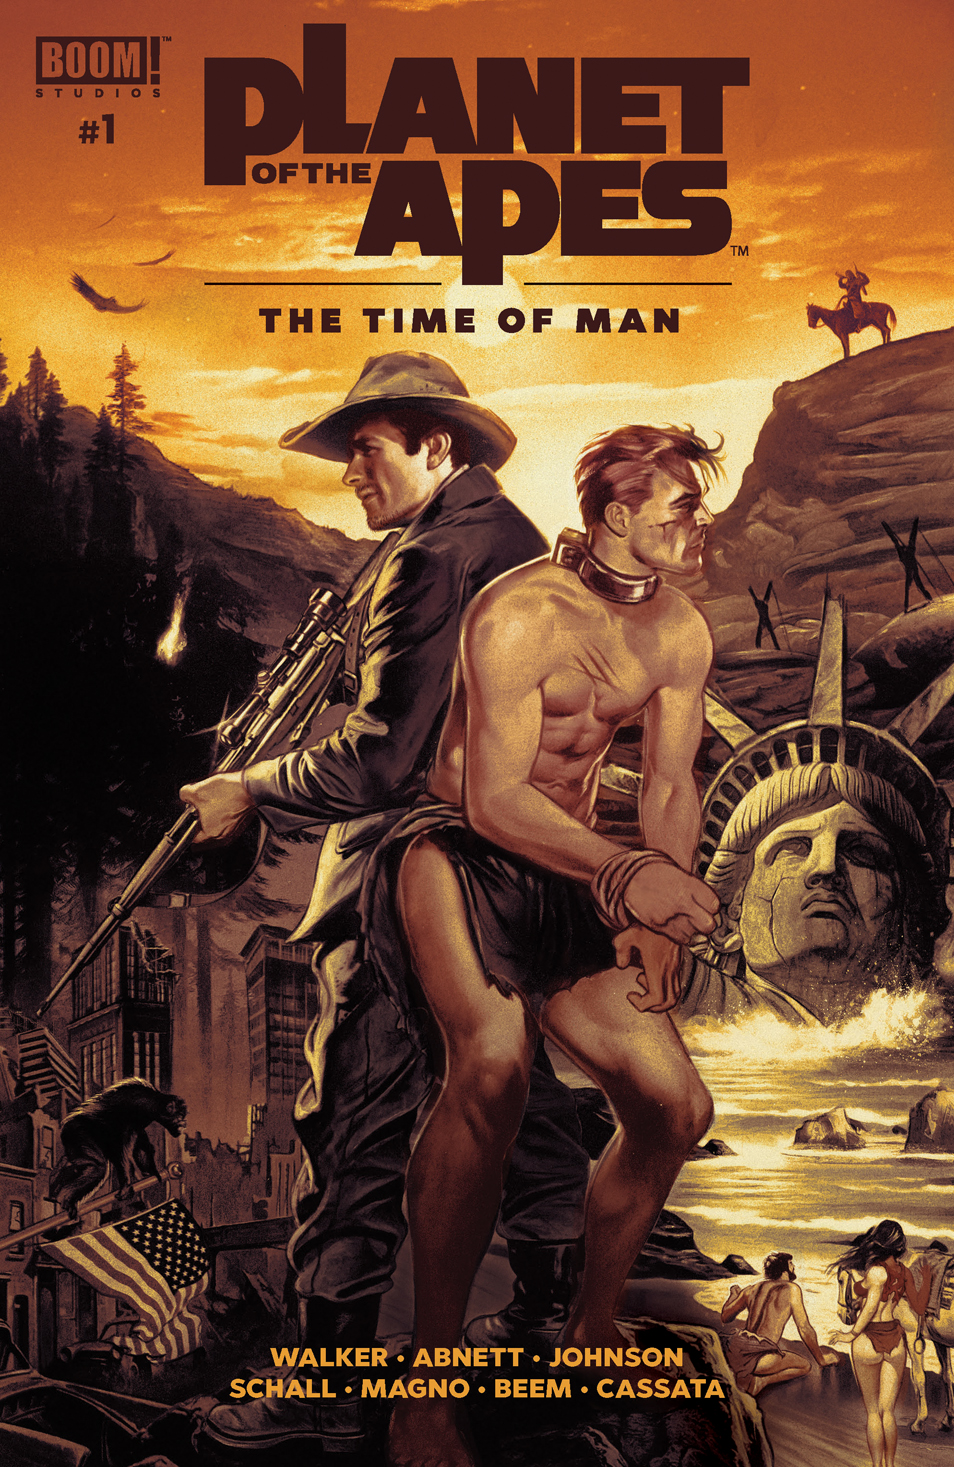 This image is the cover for the book Planet of the Apes: The Time of Man #1, Planet of the Apes